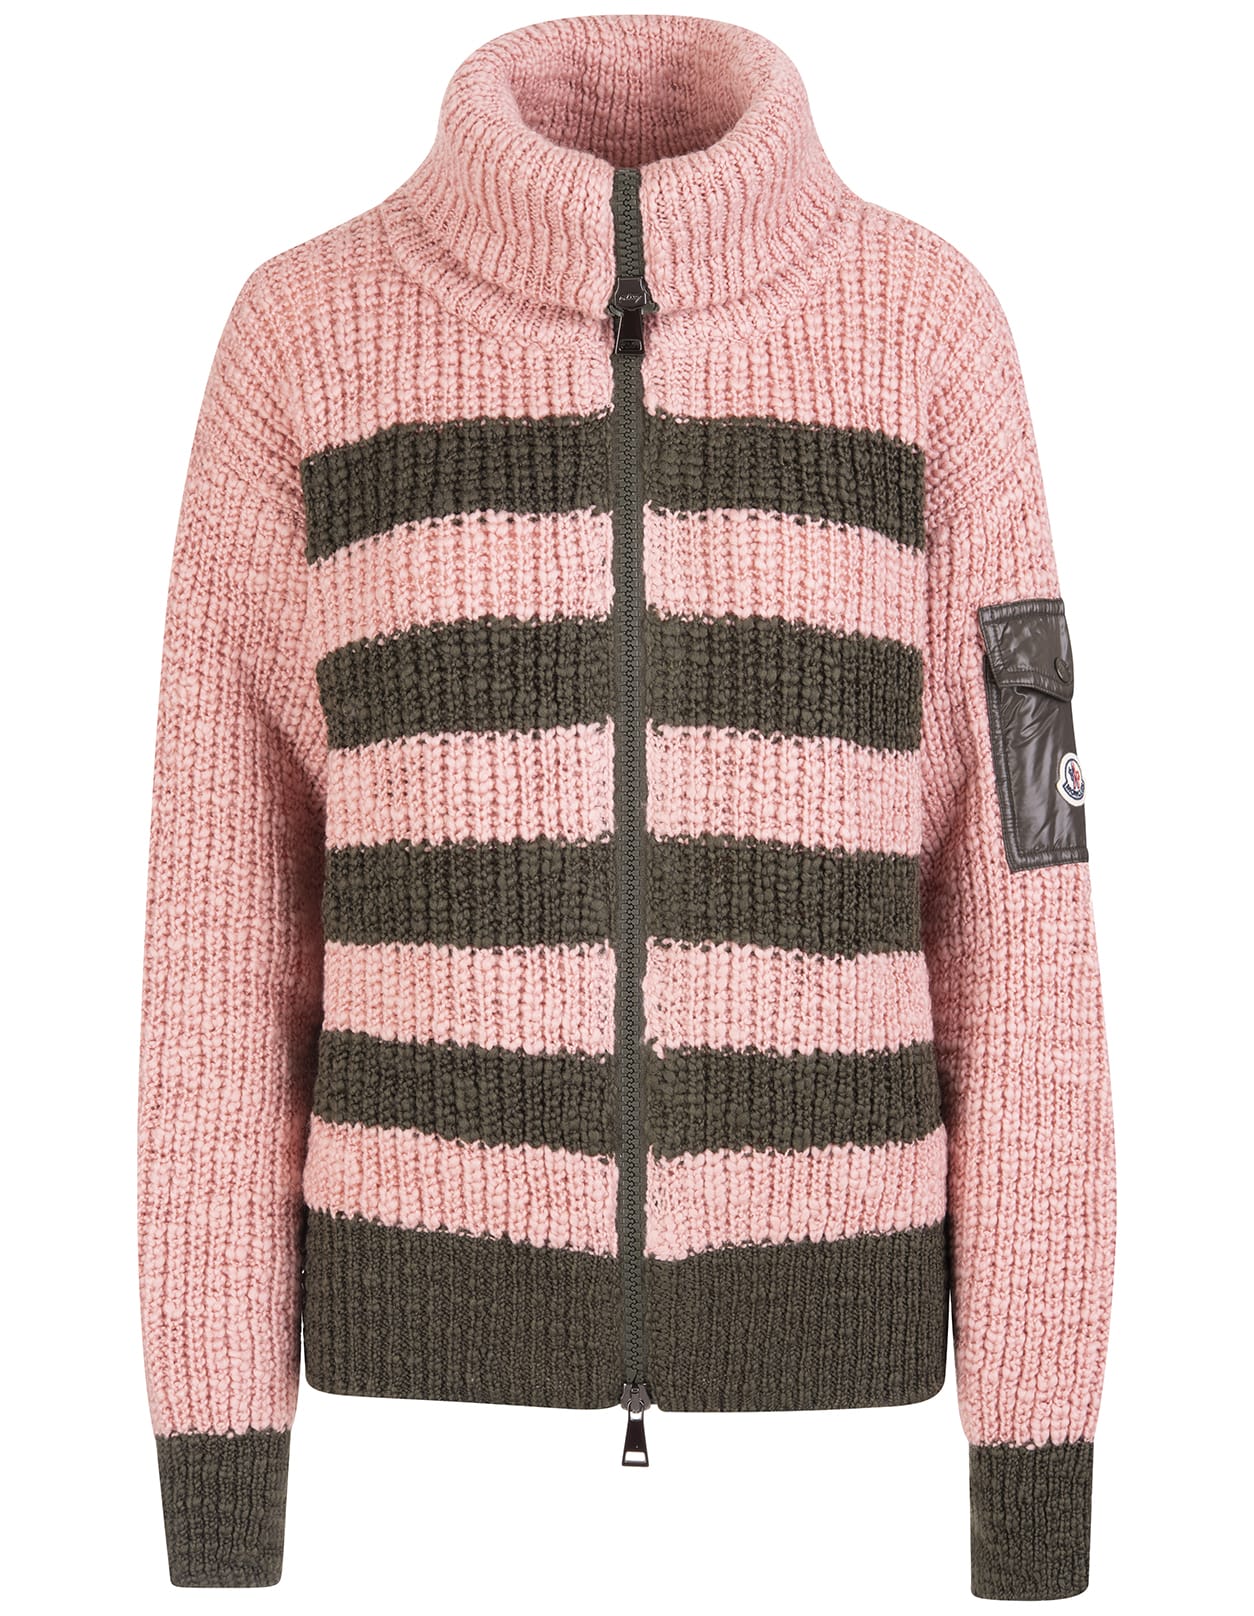 Moncler Woman Green And Antique Pink Striped Wool And Cotton Cardigan